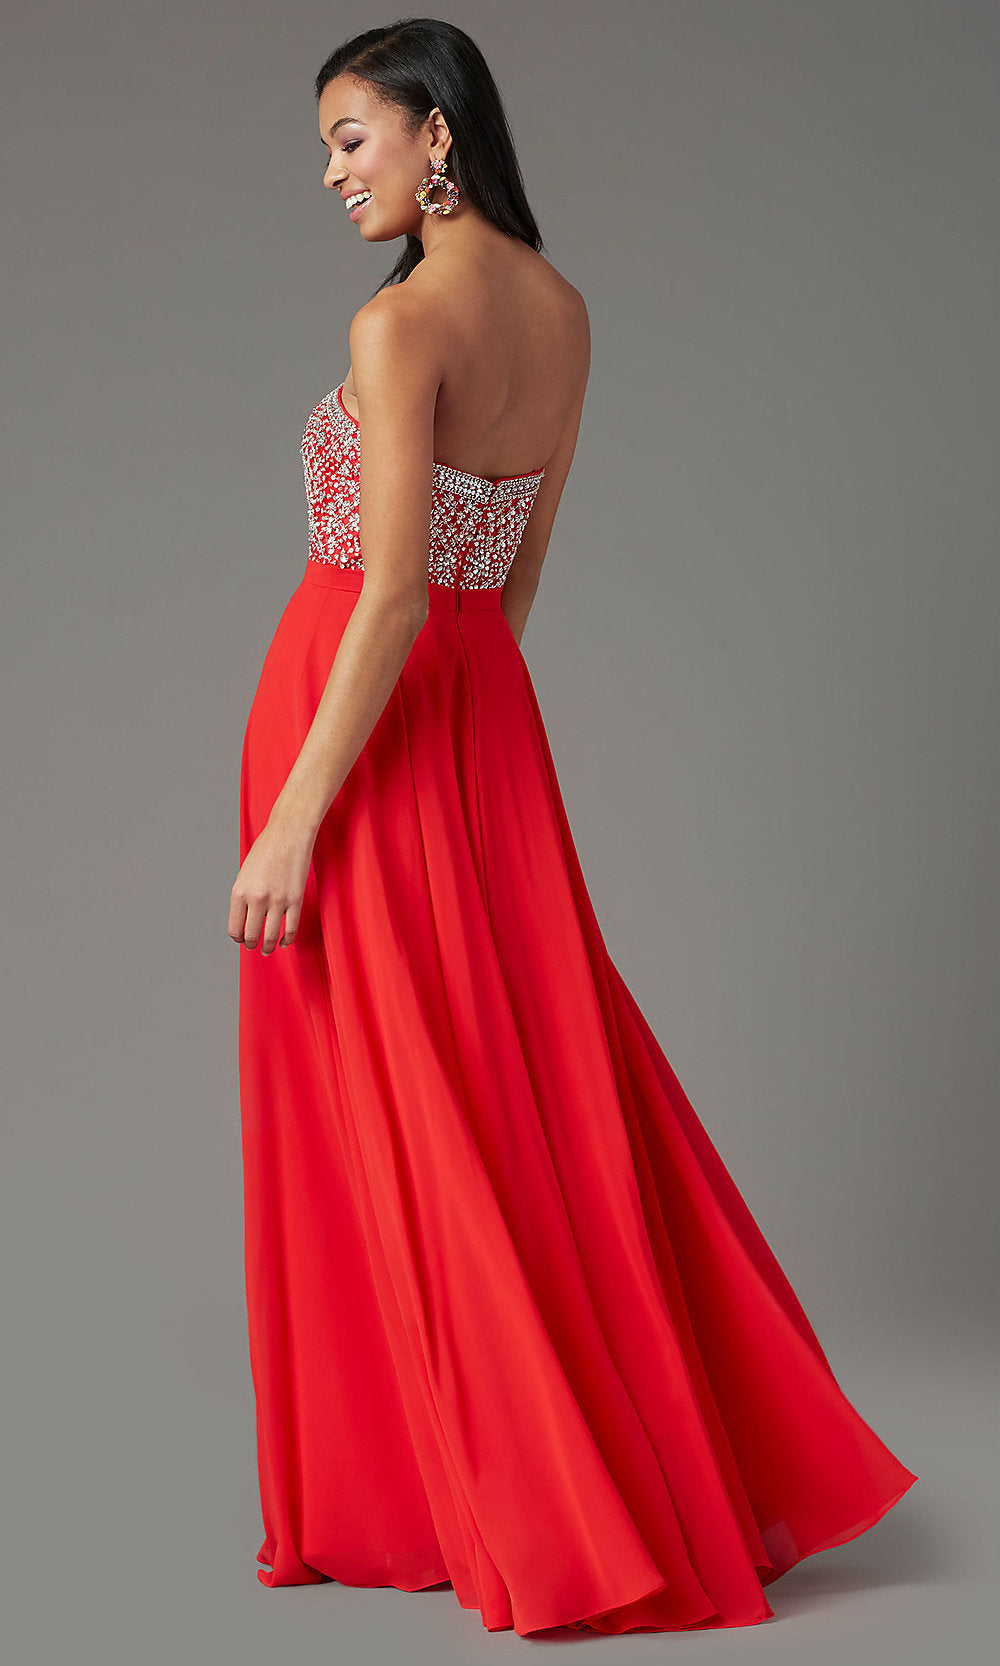  Strapless Long Formal Prom Dress by PromGirl